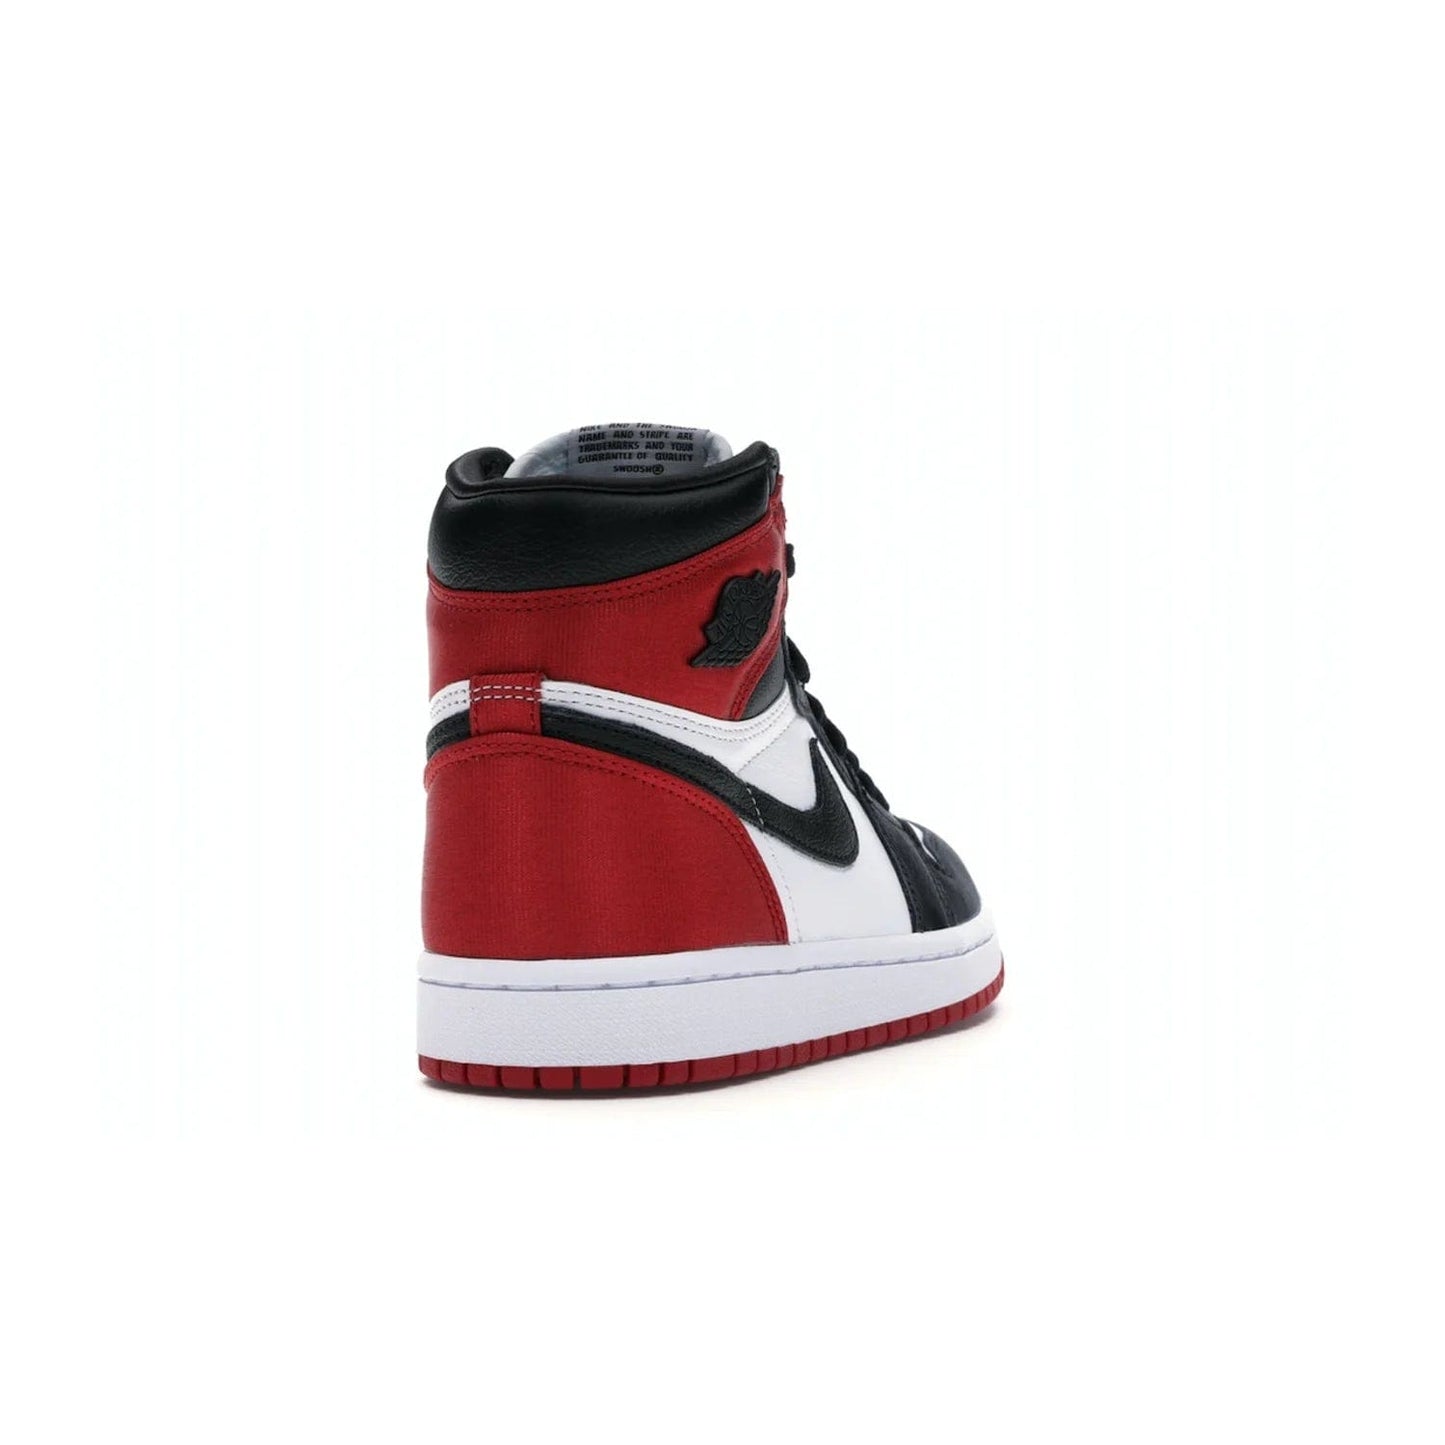 Jordan 1 Retro High Satin Black Toe (Women's) - Image 30 - Only at www.BallersClubKickz.com - Luxurious take on the timeless Air Jordan 1. Features a mix of black leather and satin materials with subtle University Red accents. Elevated look with metal Wings logo on the heel. Released in August 2019.